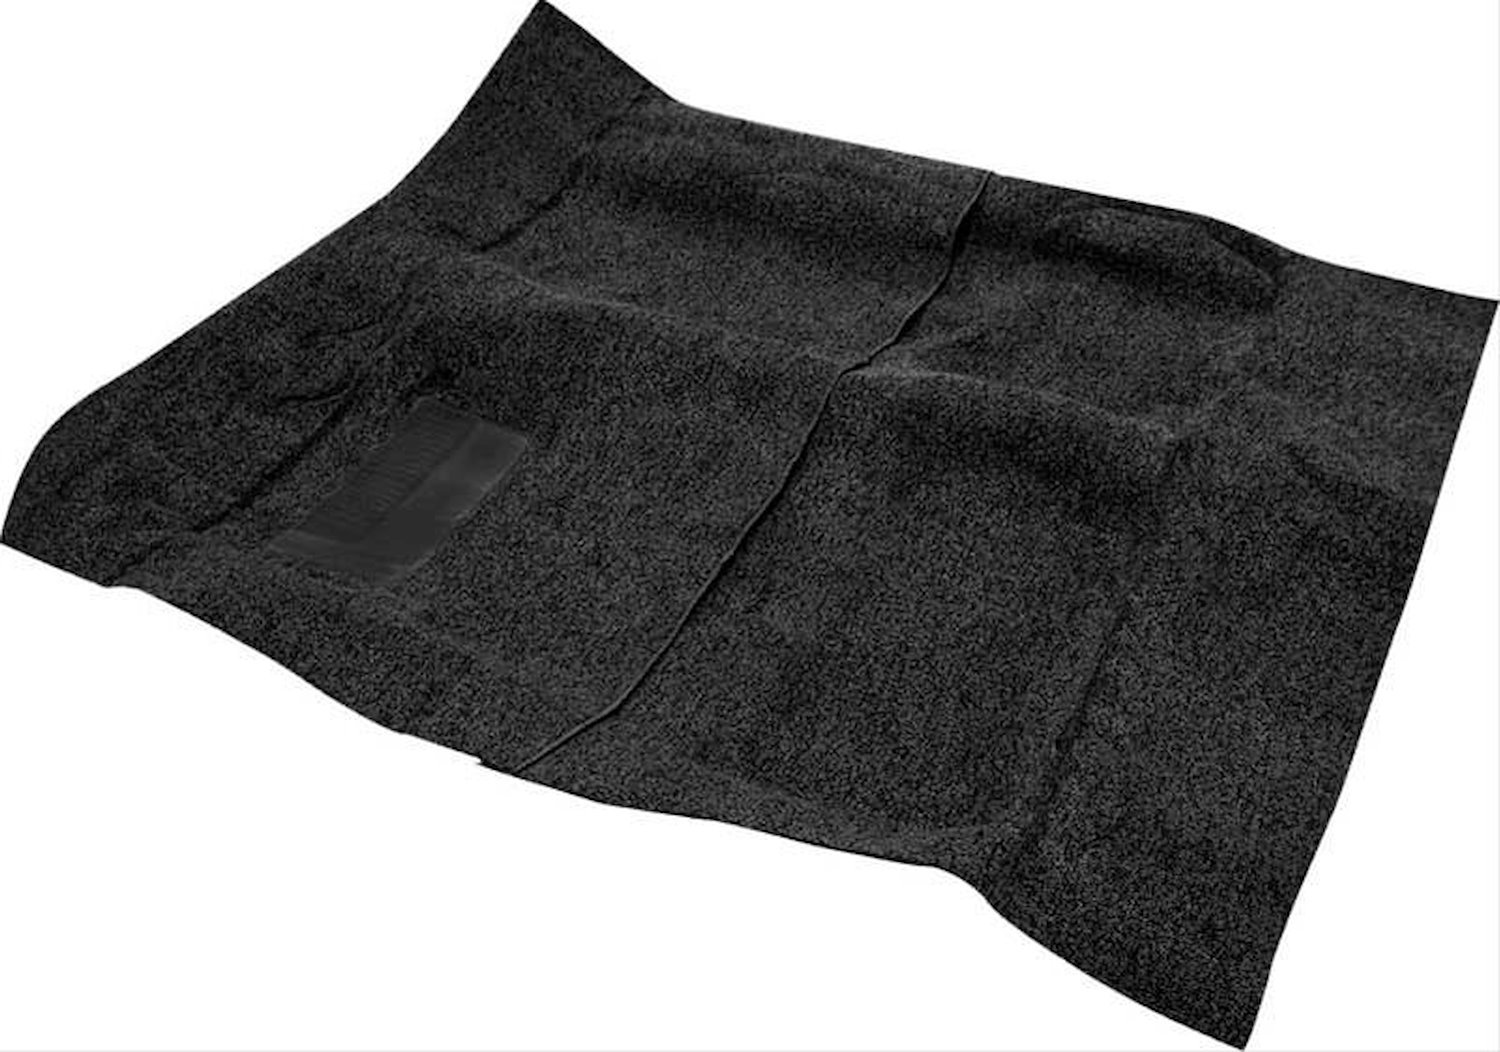 MB9861001 Loop Carpet 1963-64 Plymouth Fury 2-Door With Auto Trans (Except 63 Sport Fury) Olive Black Tuxedo